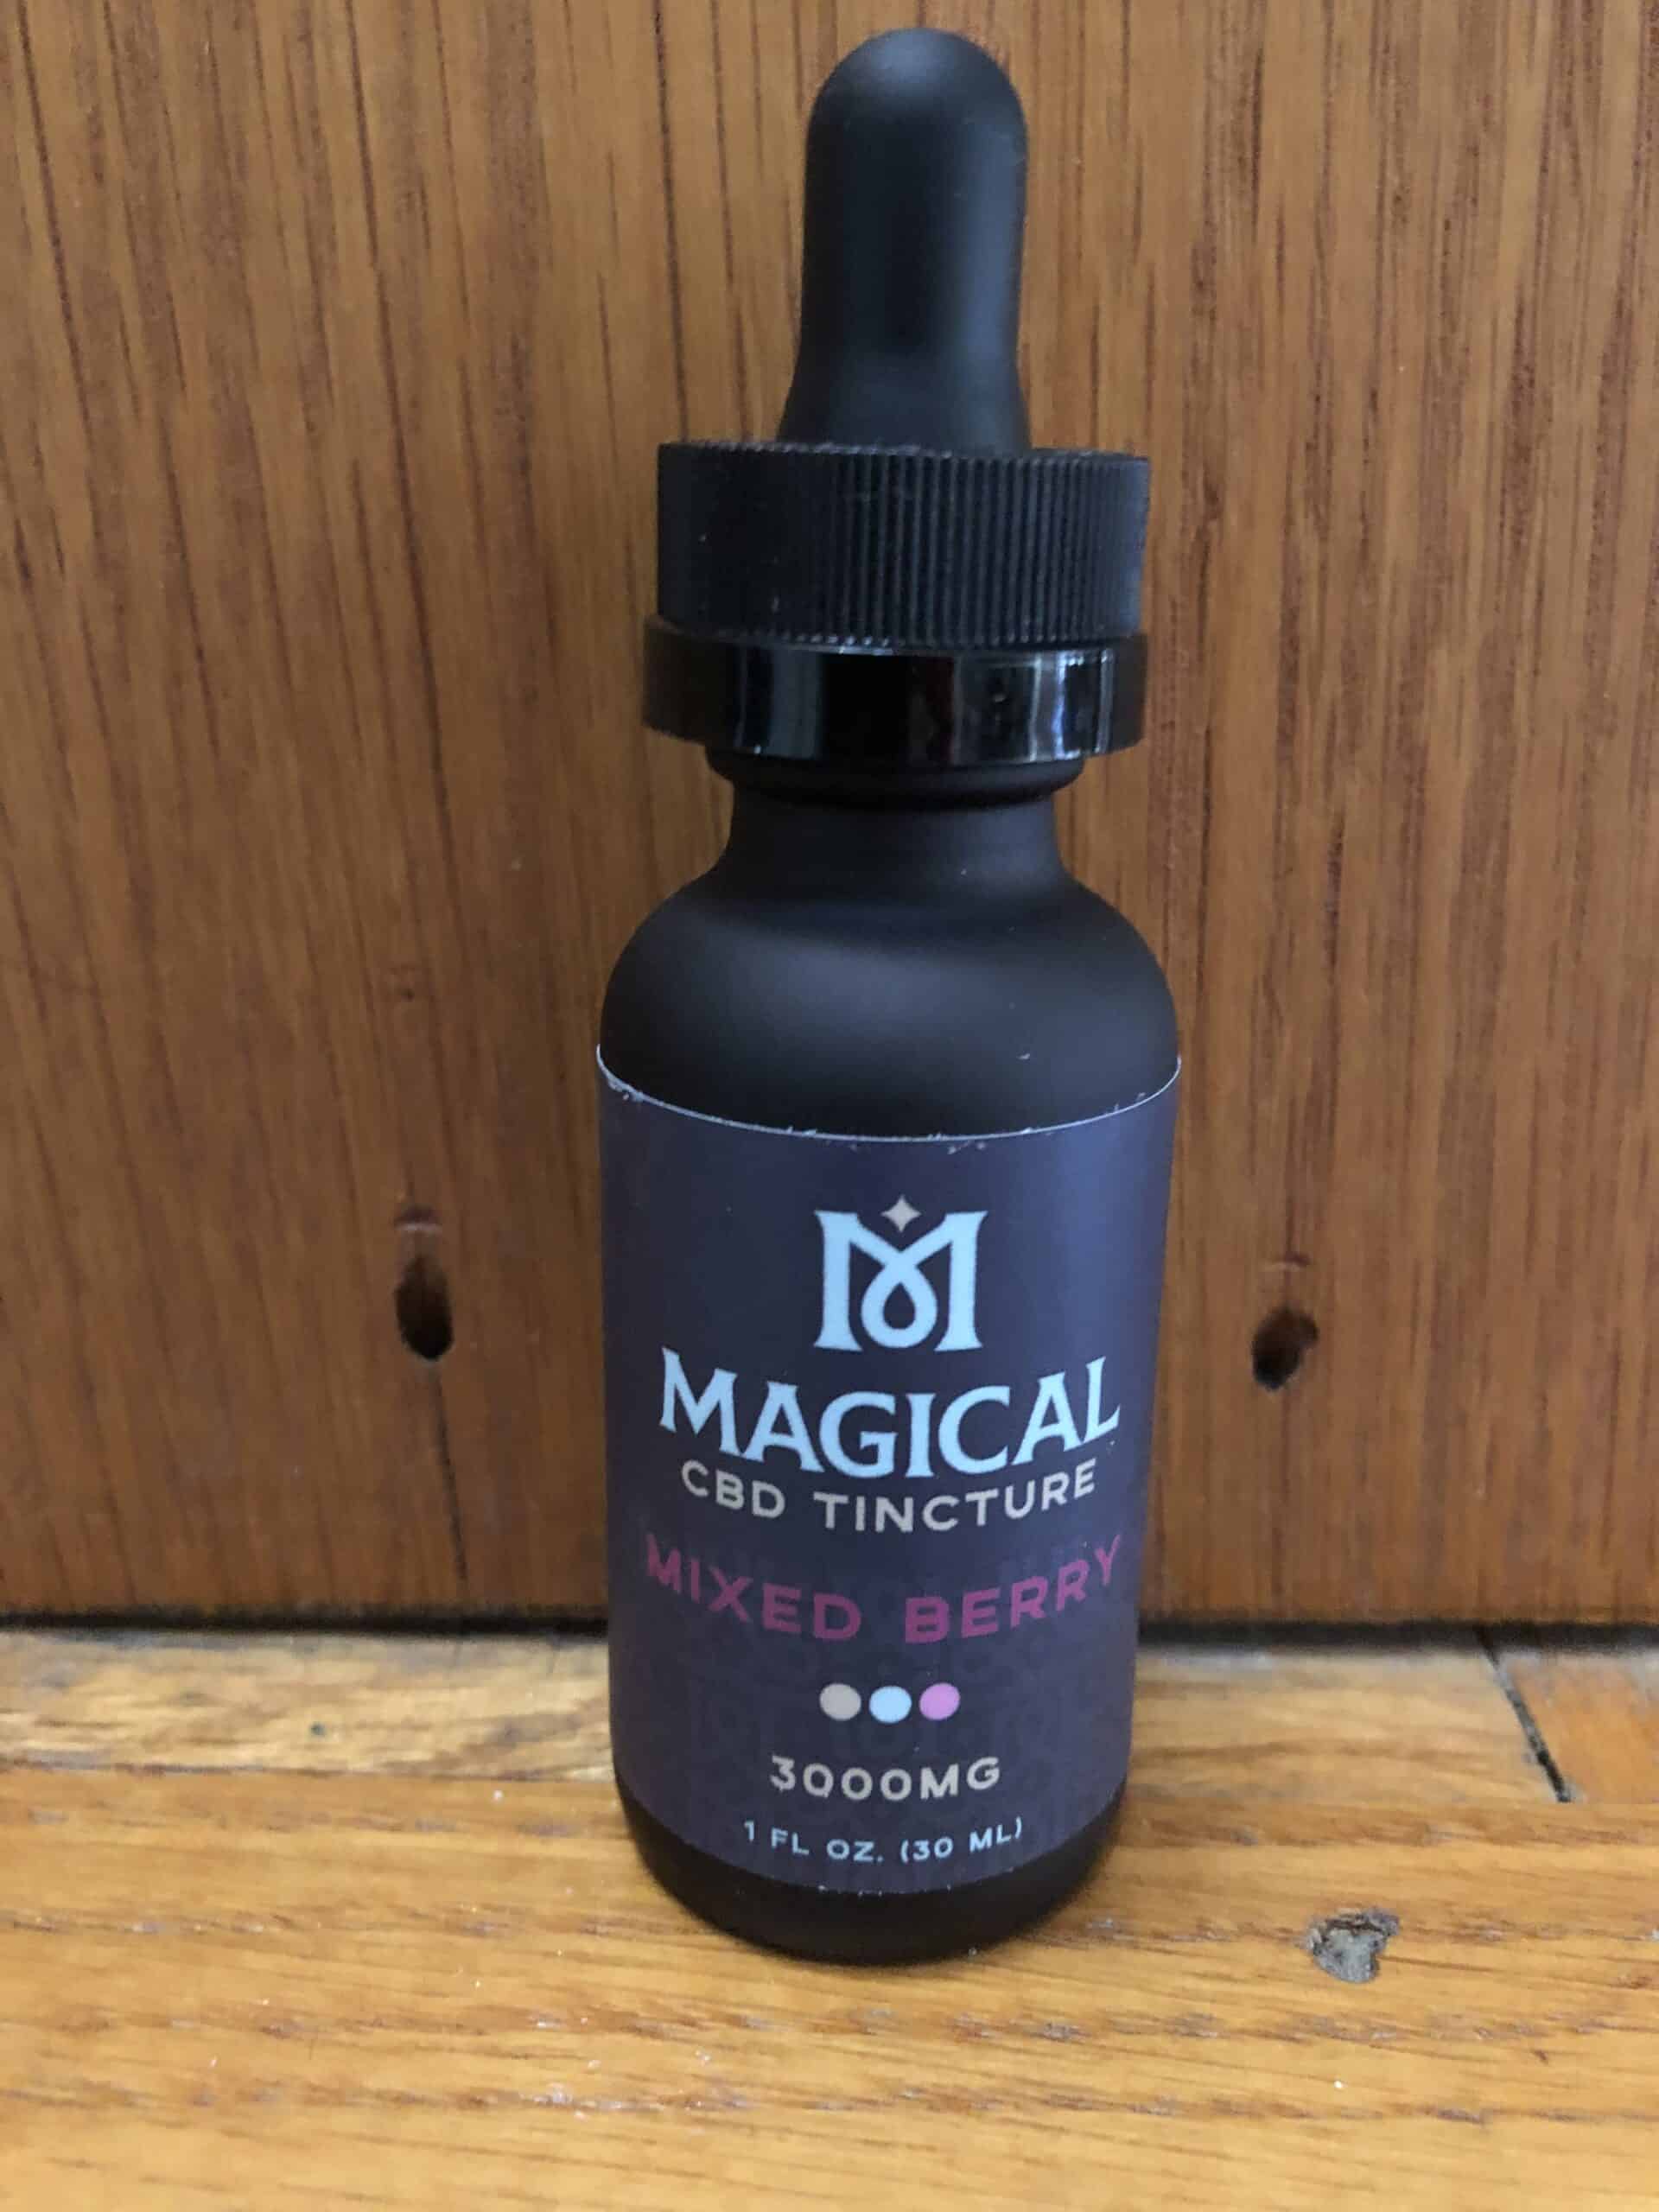 Magical CBD Tincture Mixed Berry 300 MG Save On Cannabis Review Beauty Shot